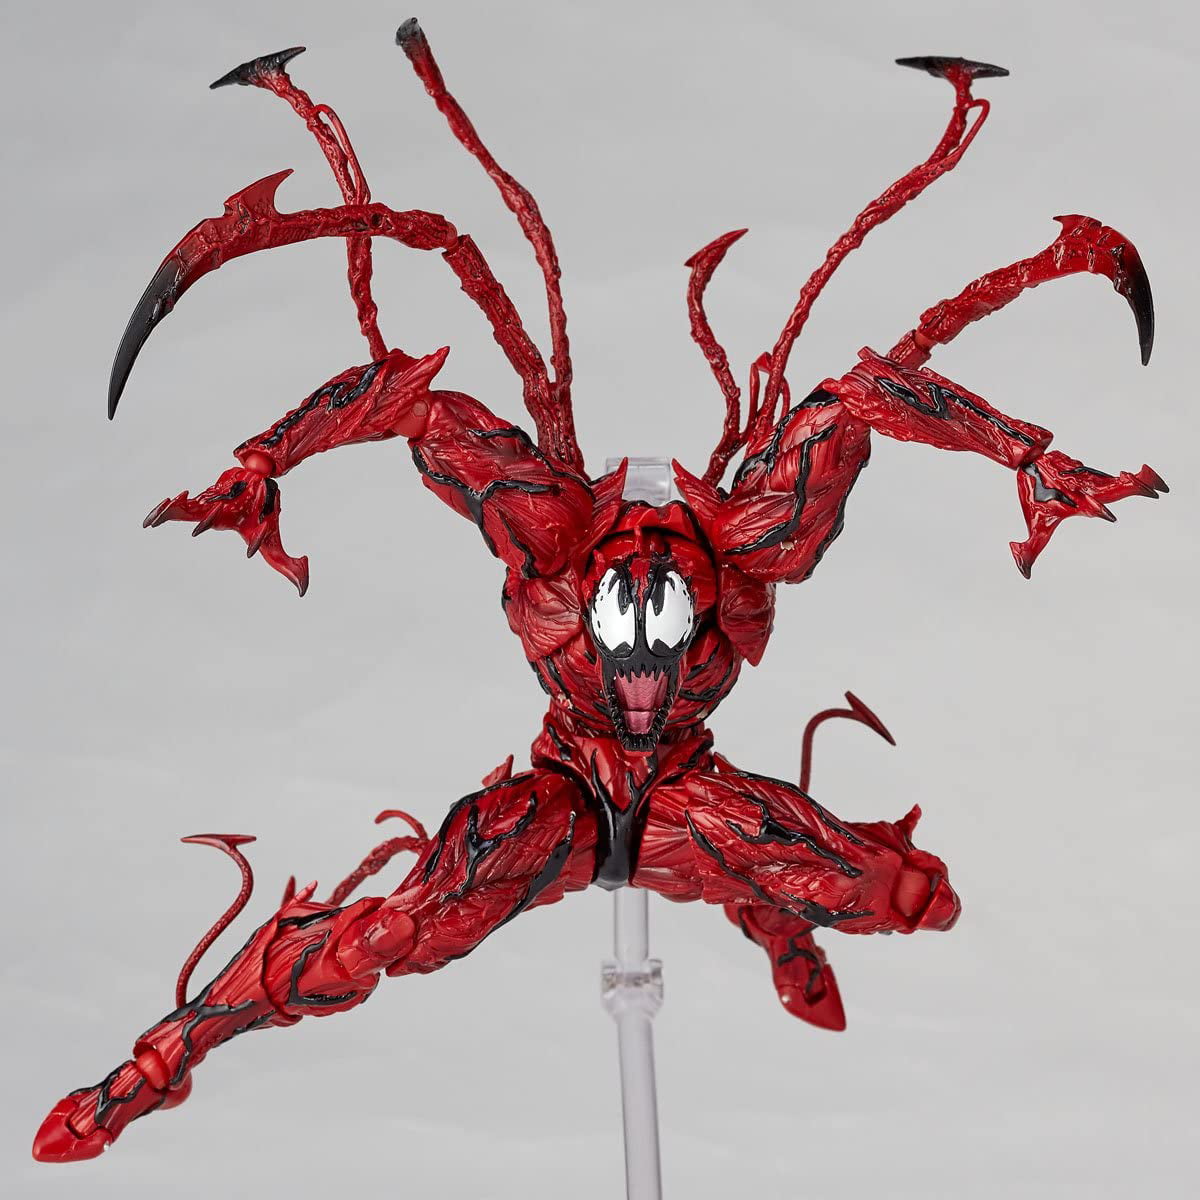 Red Spider-Man CARNAGE Revoltech Action Figure PVC Figurine Toy Gift Collection 